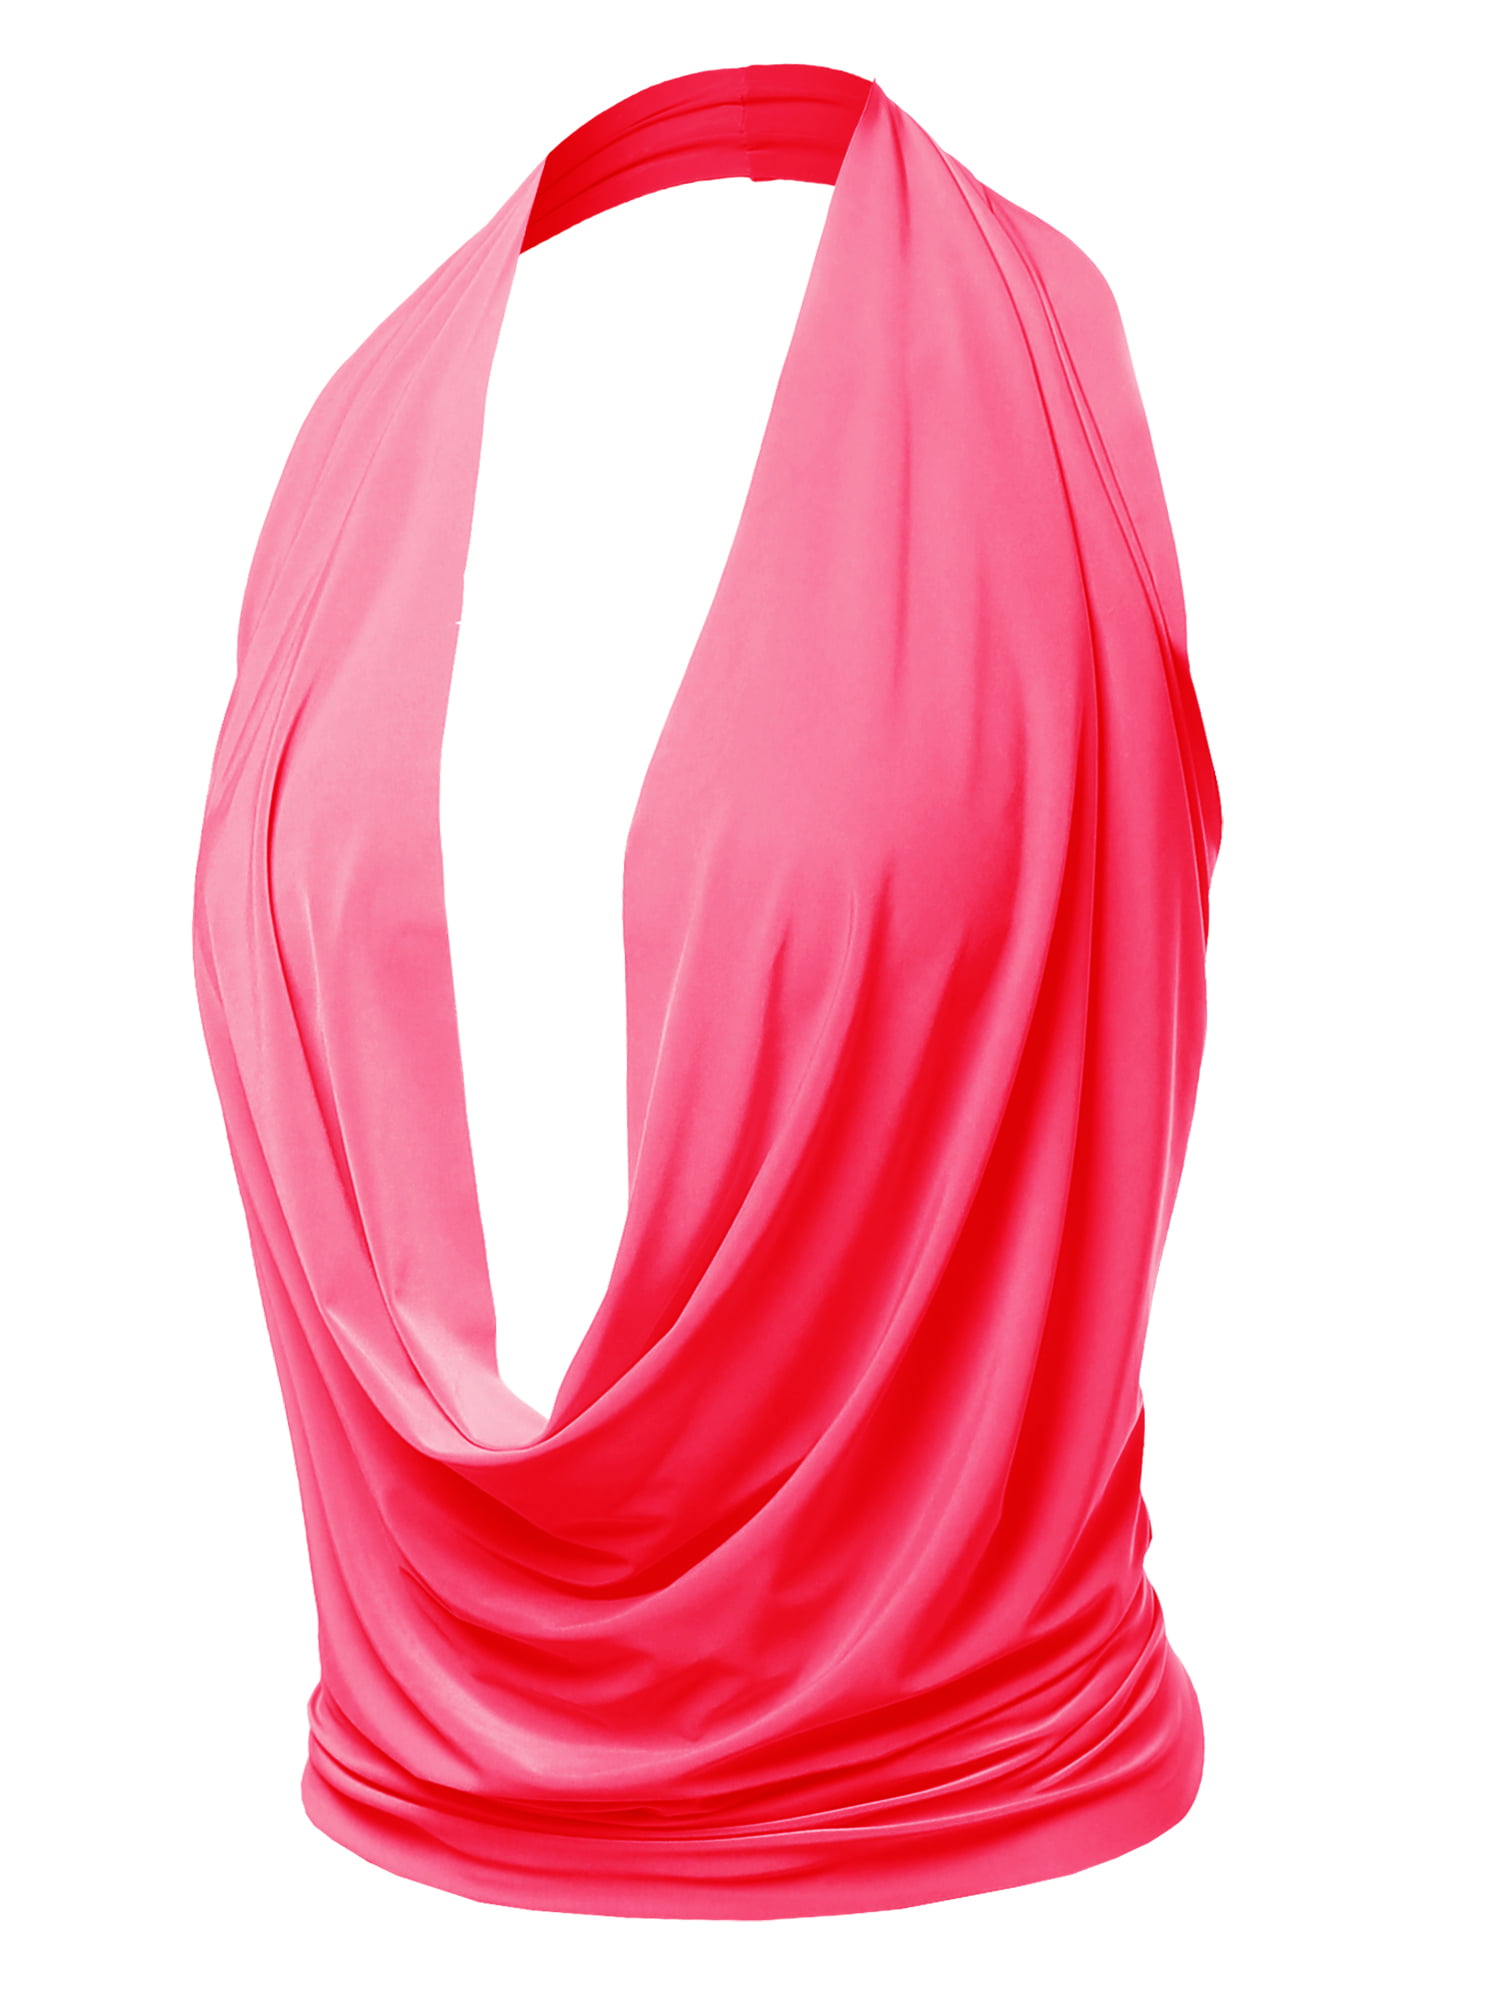 A2Y Women's Sexy Drape Front Deep V-Neck Cowl Neckline Halter Backless  Party Club Top Neon Pink XL 